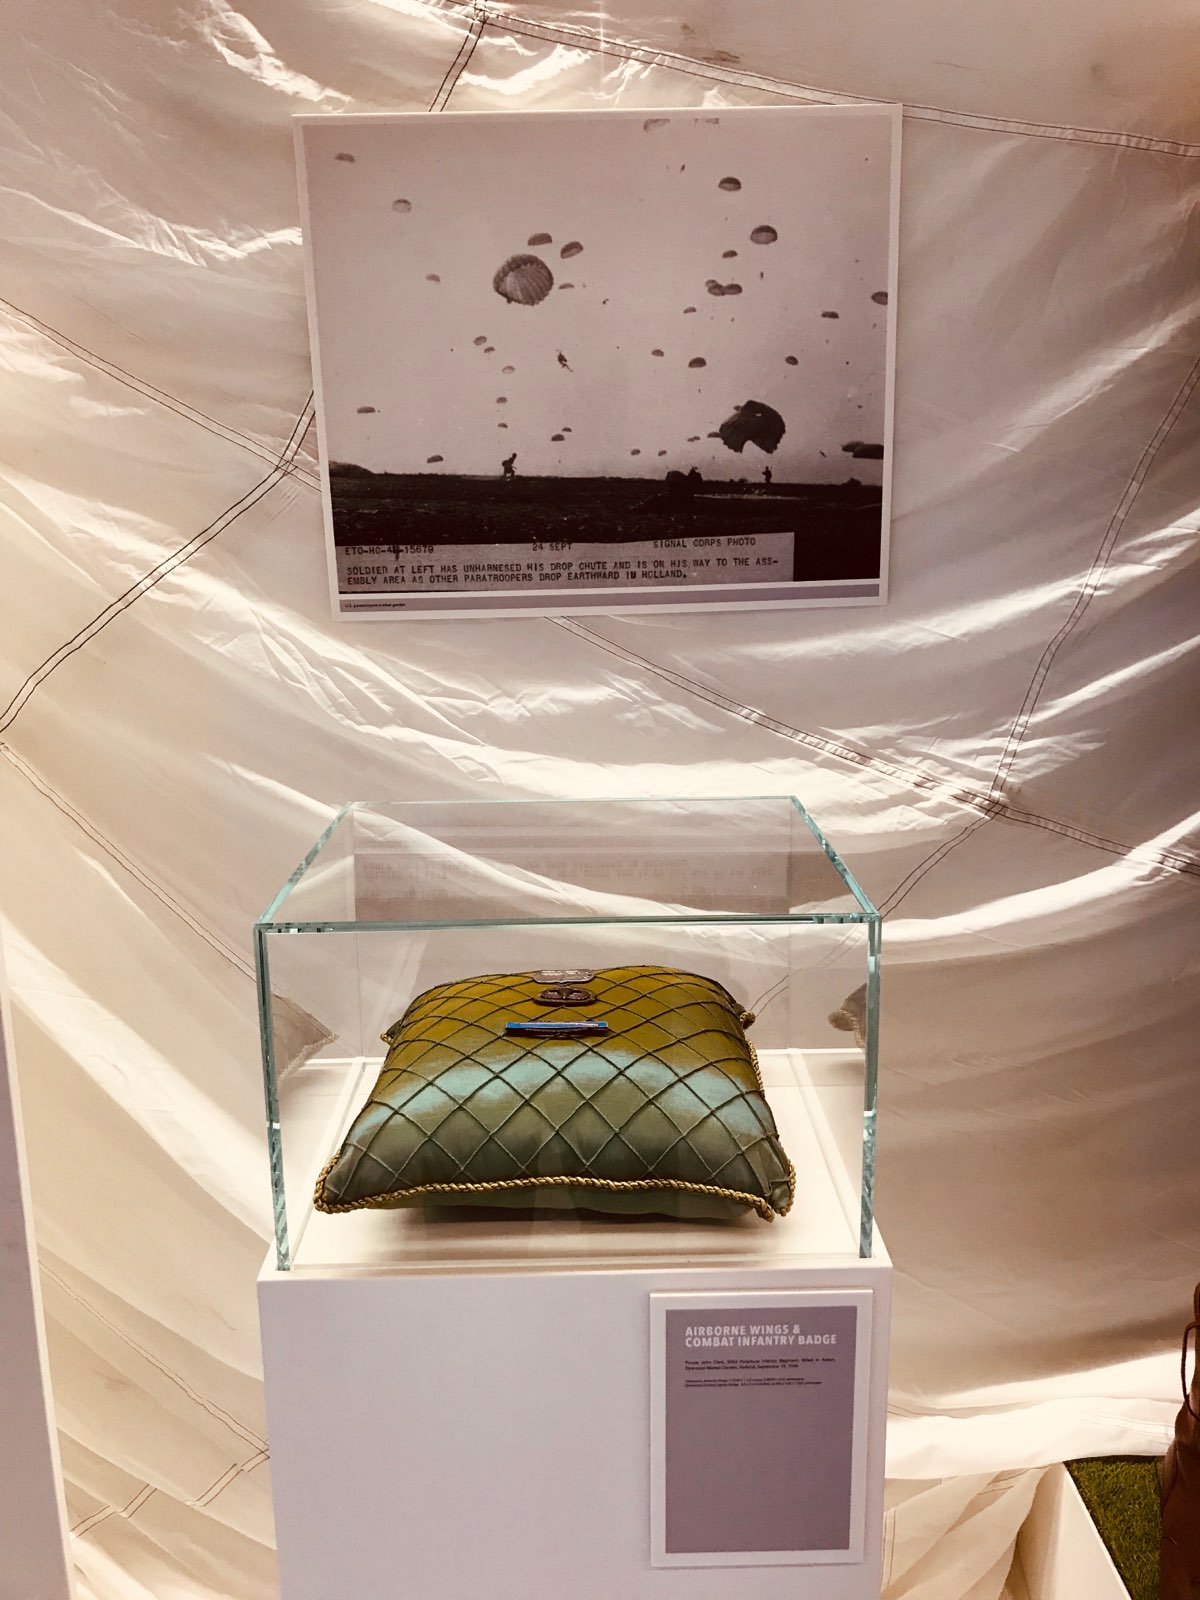 Color photograph, museum display of airbourne wings and combat infantry badges on a green pillow. A black and white photograph is in the background.